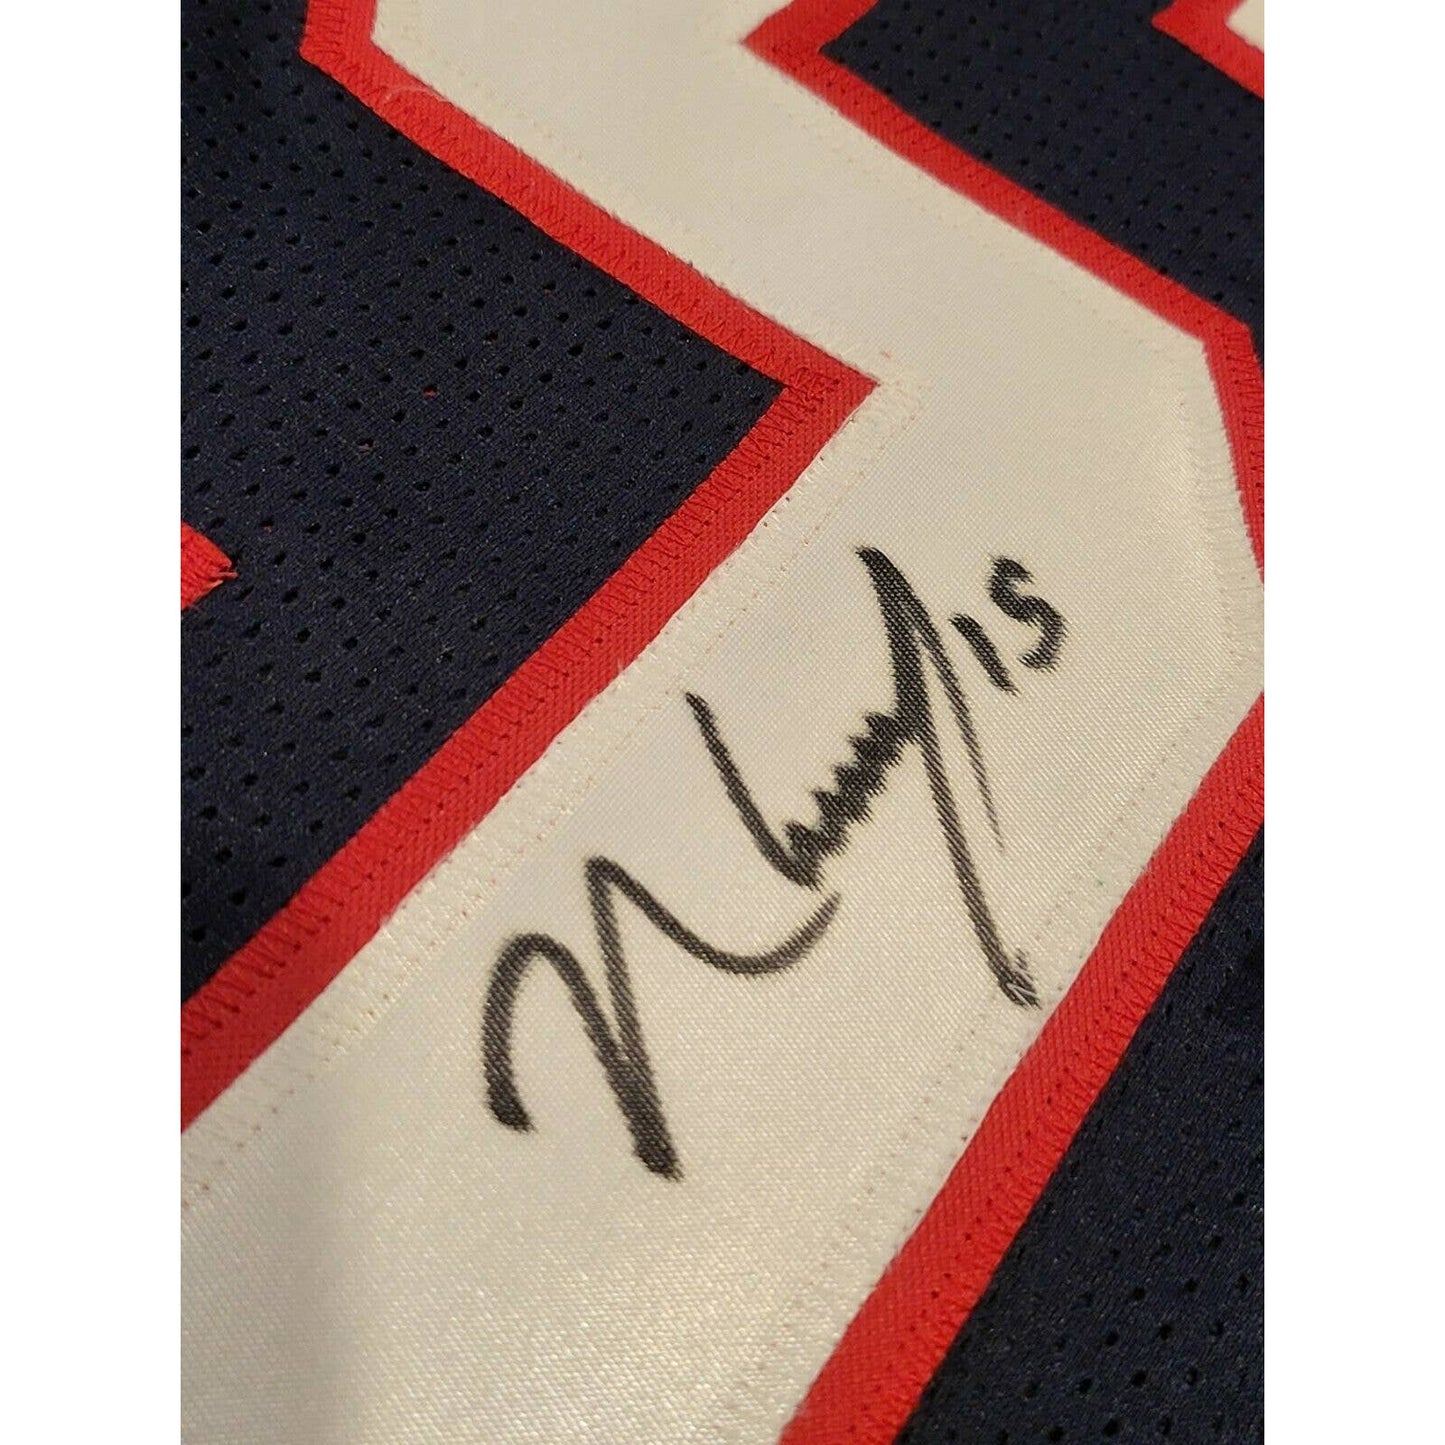 N'Keal Harry Autographed/Signed Jersey Beckett Sticker New England Patriots - TreasuresEvolved